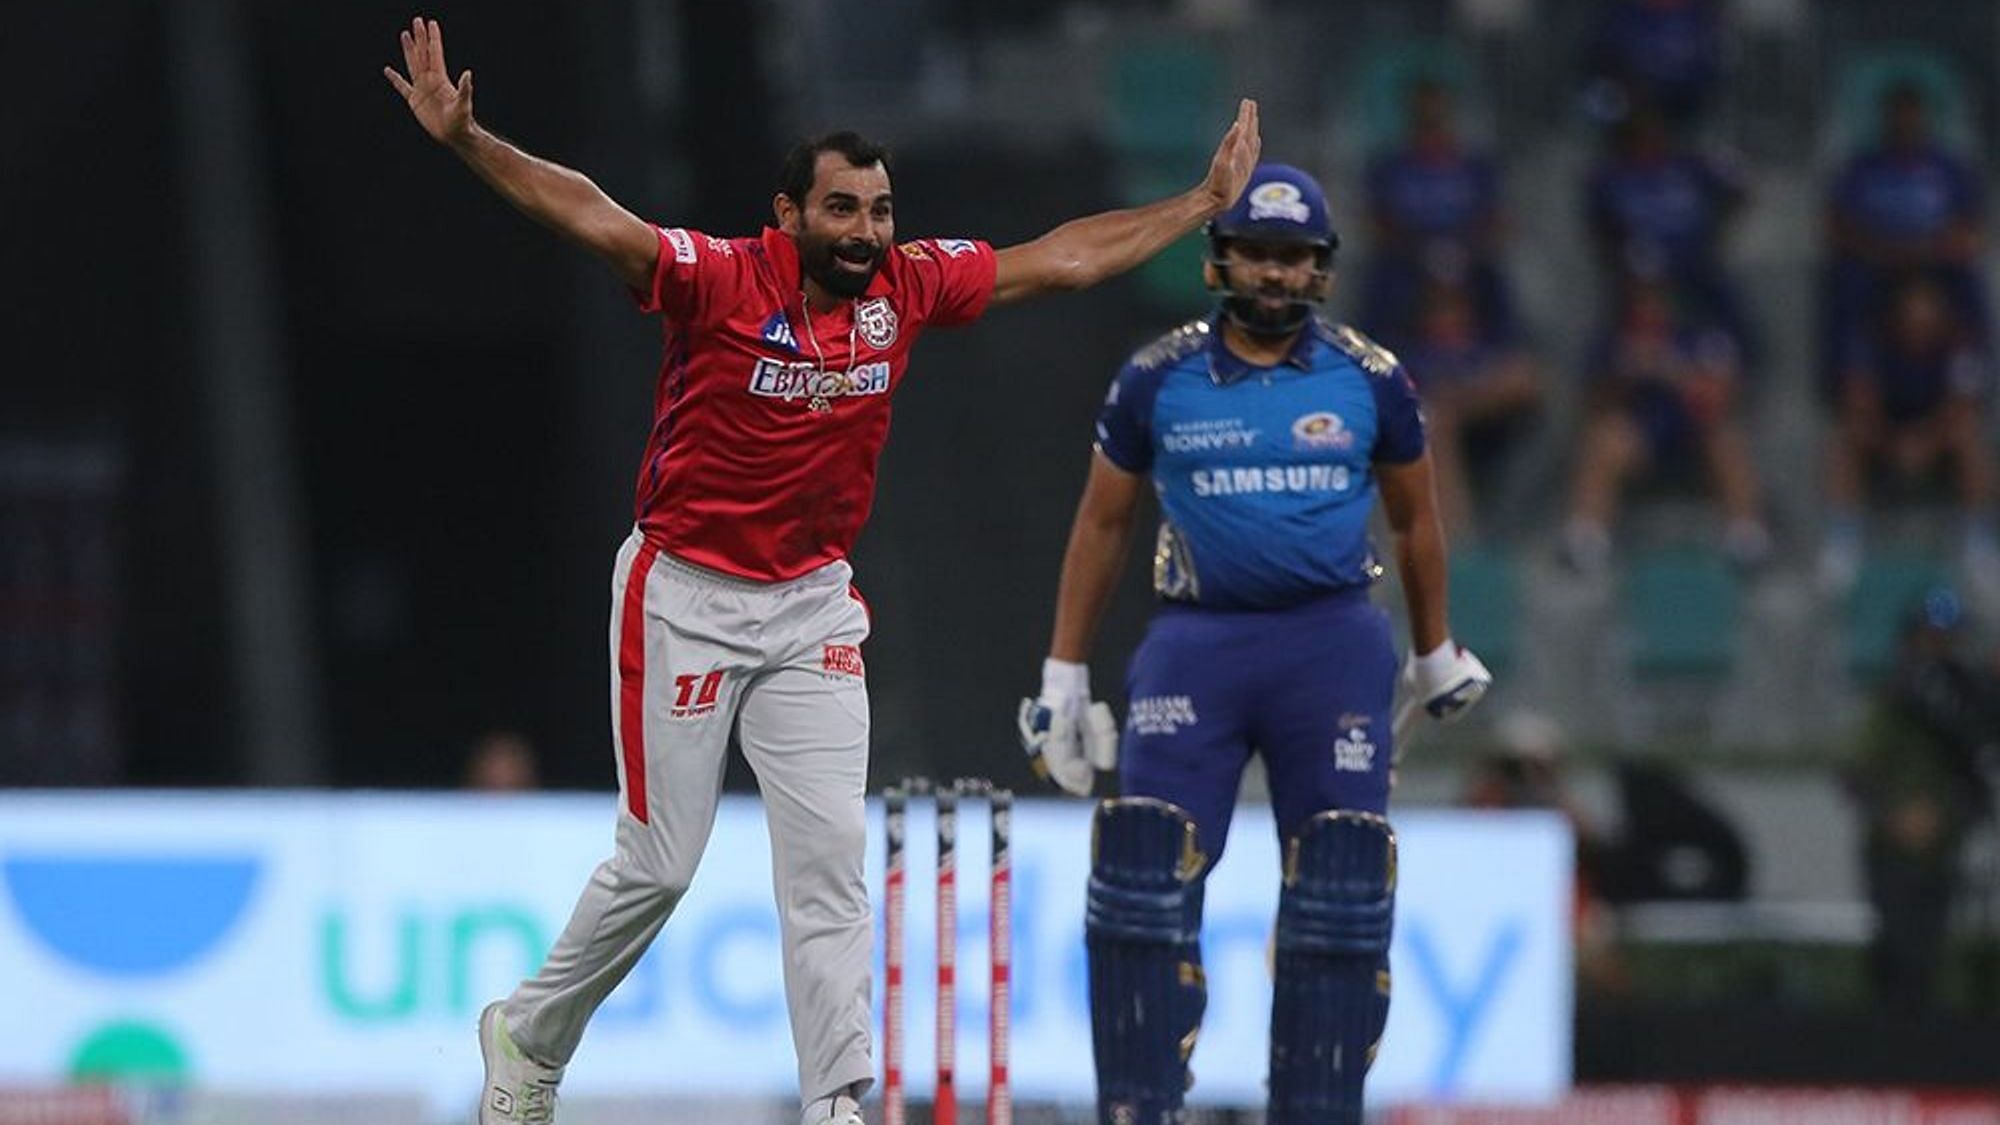 Mohammad Shami has been in top form for Kings XI Punjab in IPL 2020, with his pace, accuracy and wicket-taking ability